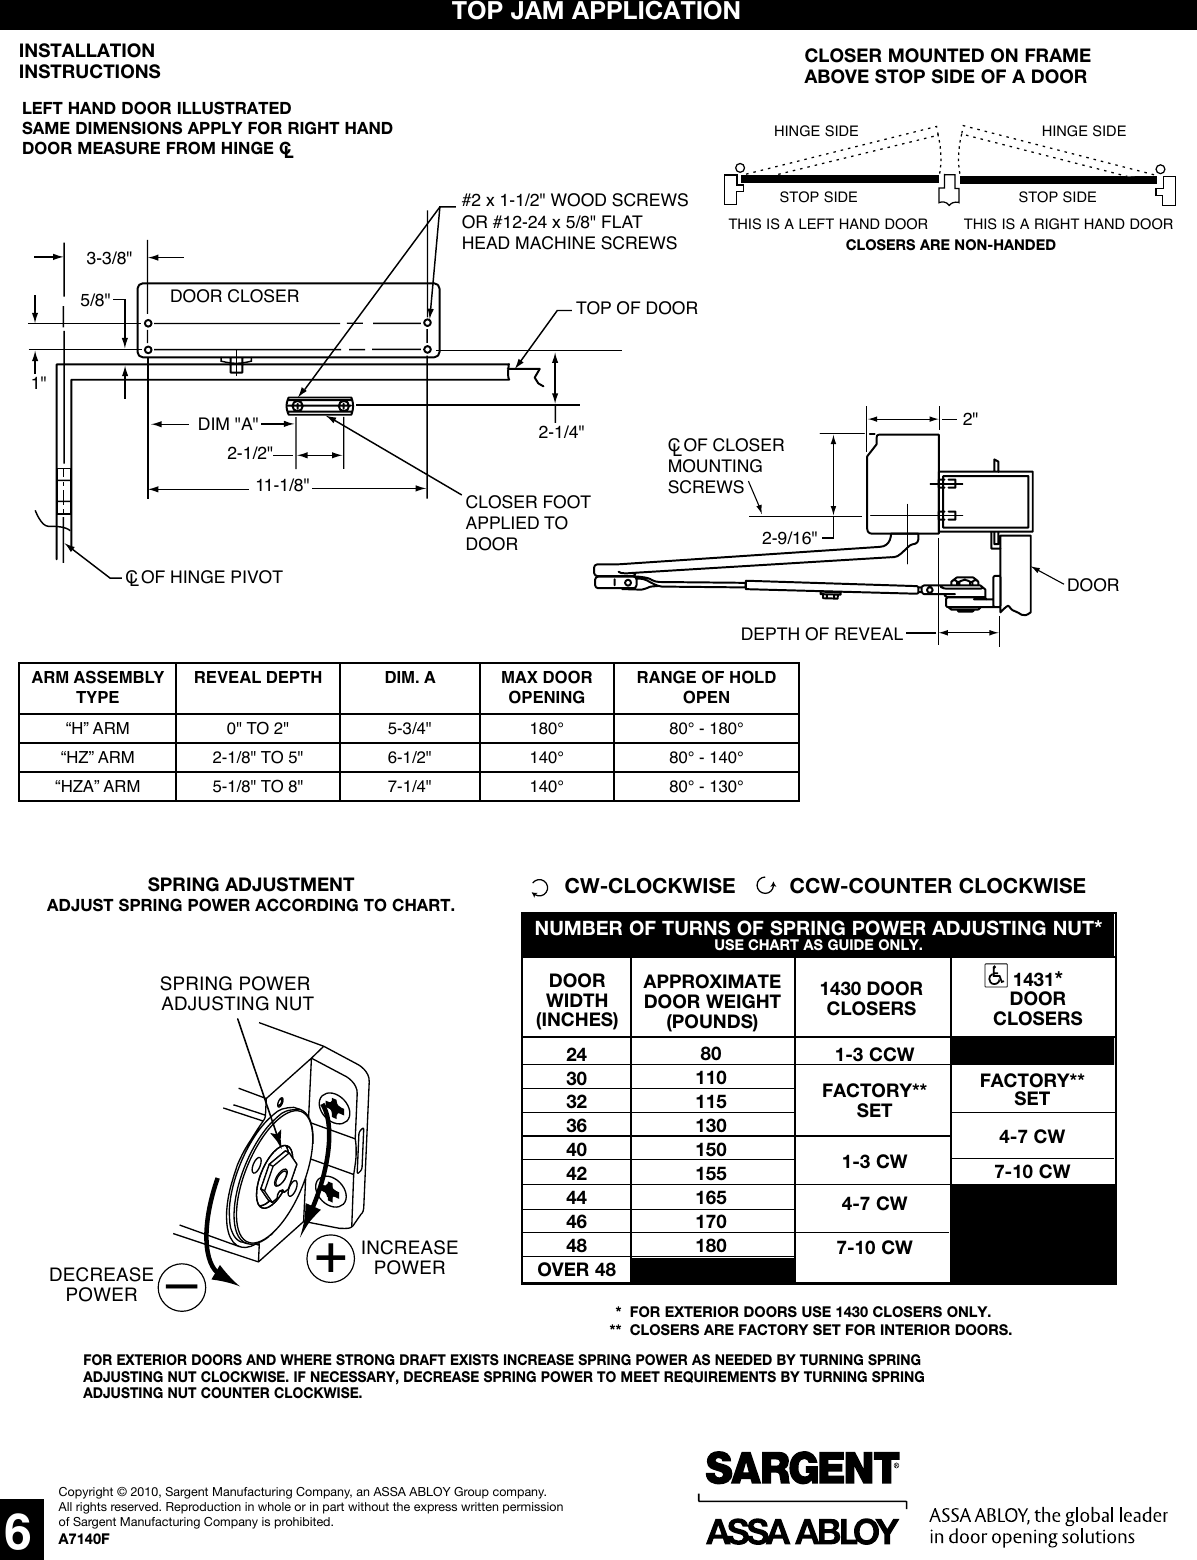 Page 6 of 8 - Sargent  Instructions For Installing 1431 Series Door Closers (with Hold Open Arms 'H'/UH/HZ/HZA/PH9) A7140F Low Res